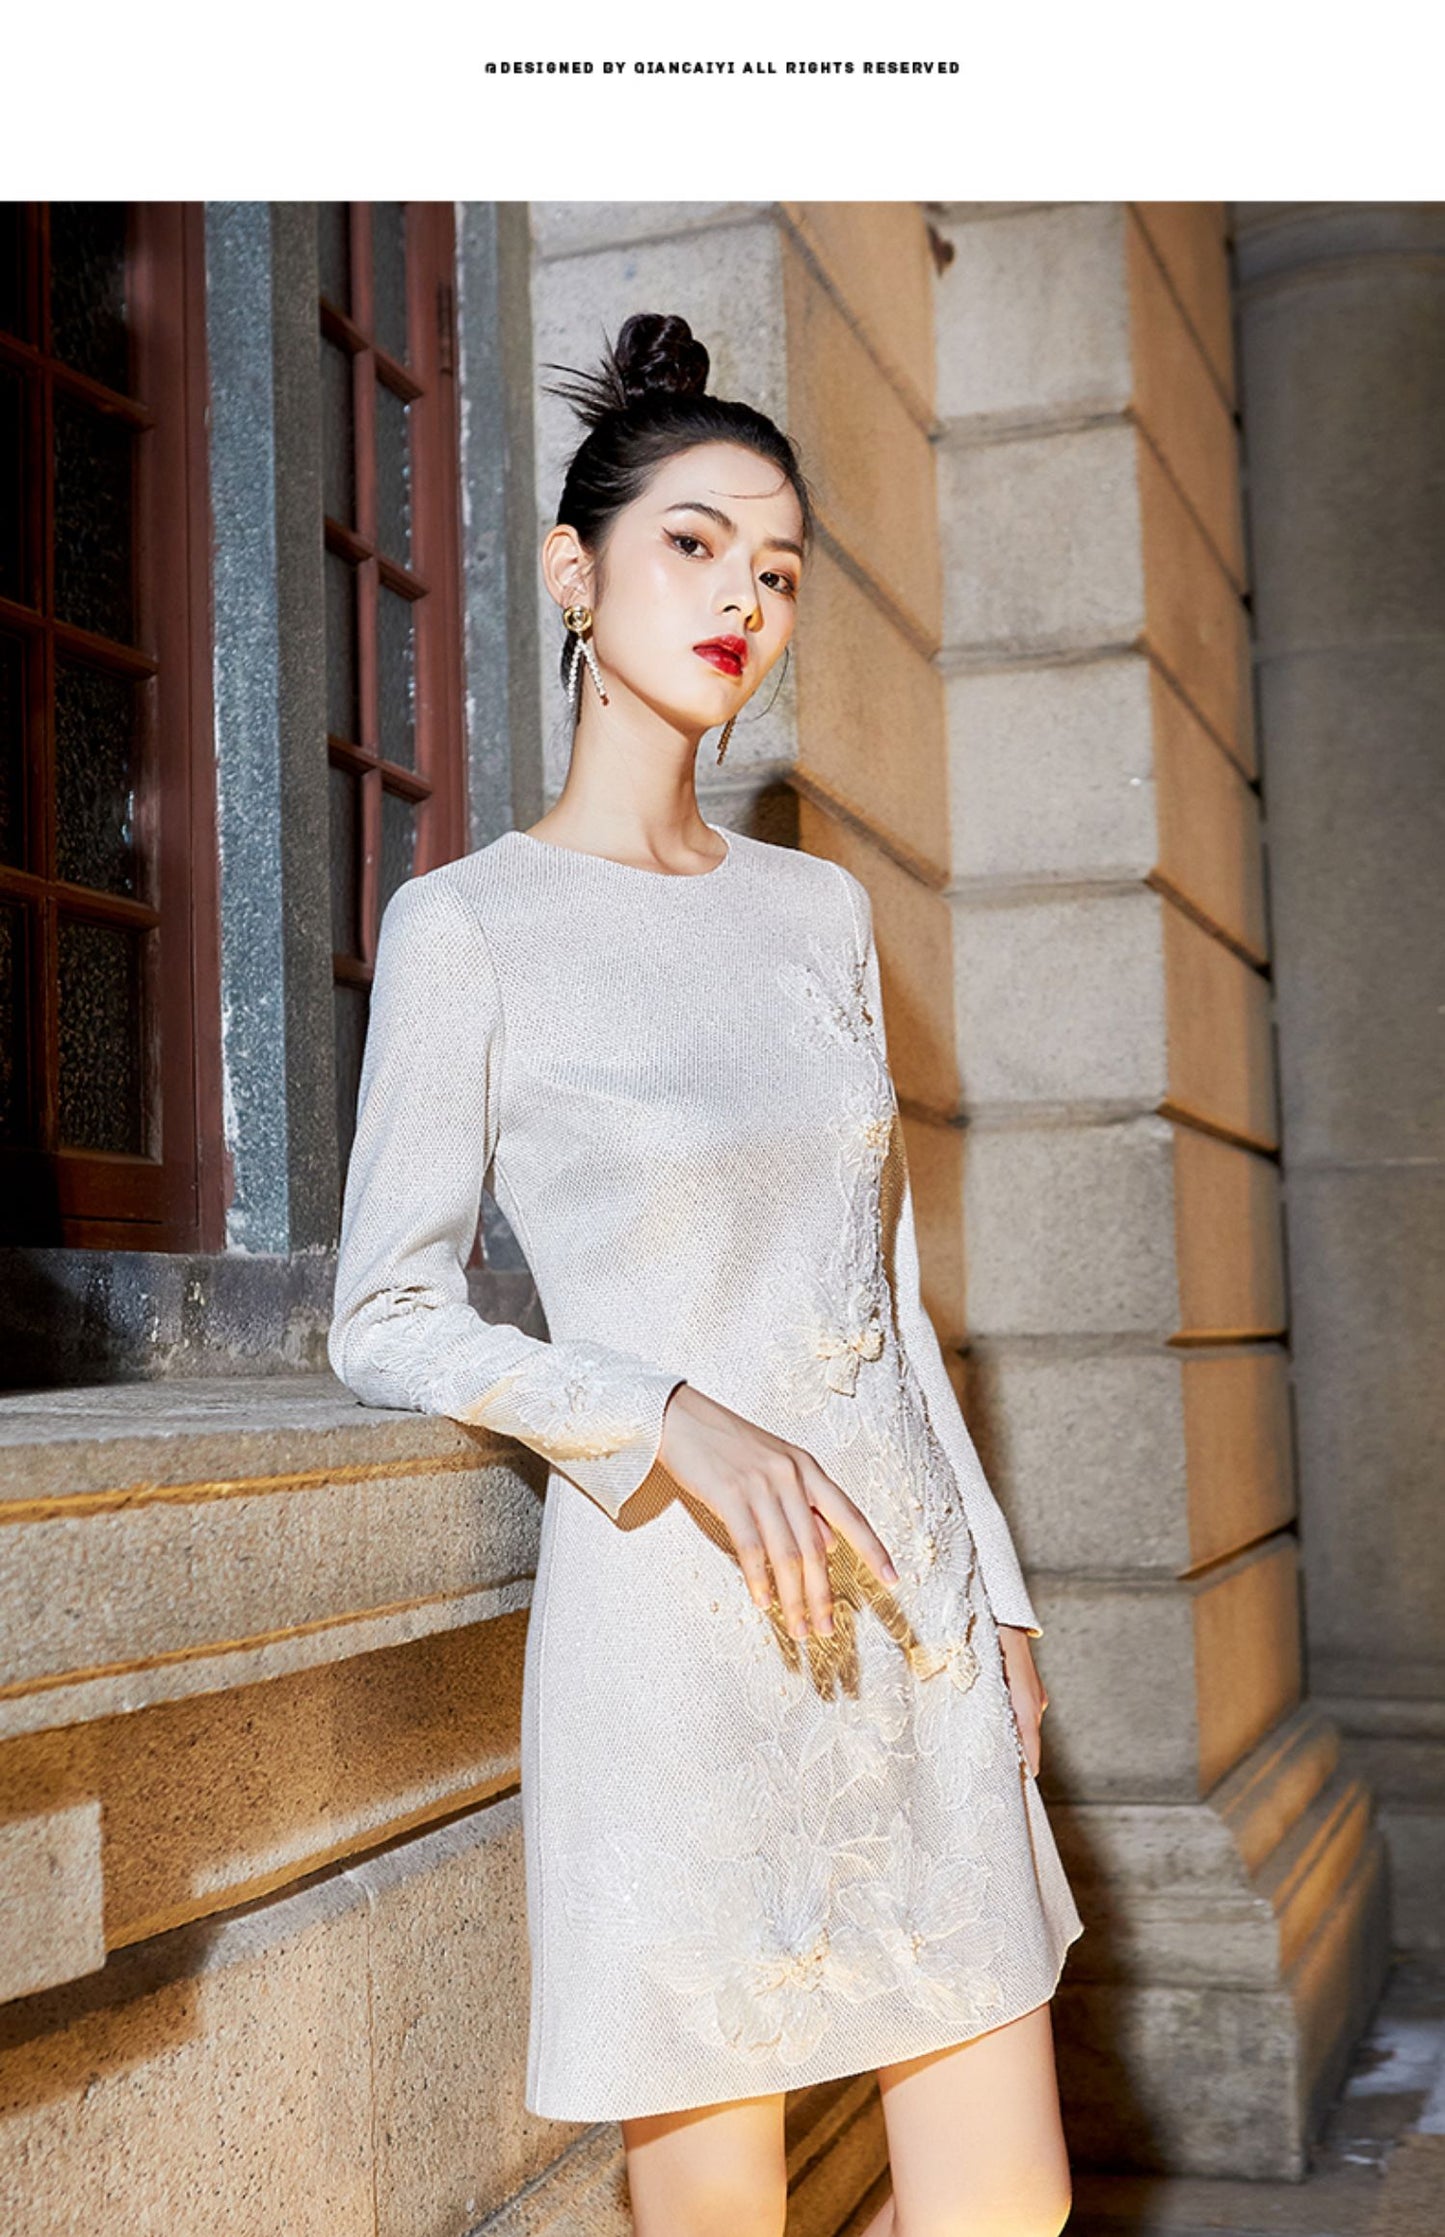 Embroidered Chinese-style long sleeve dress- Chile